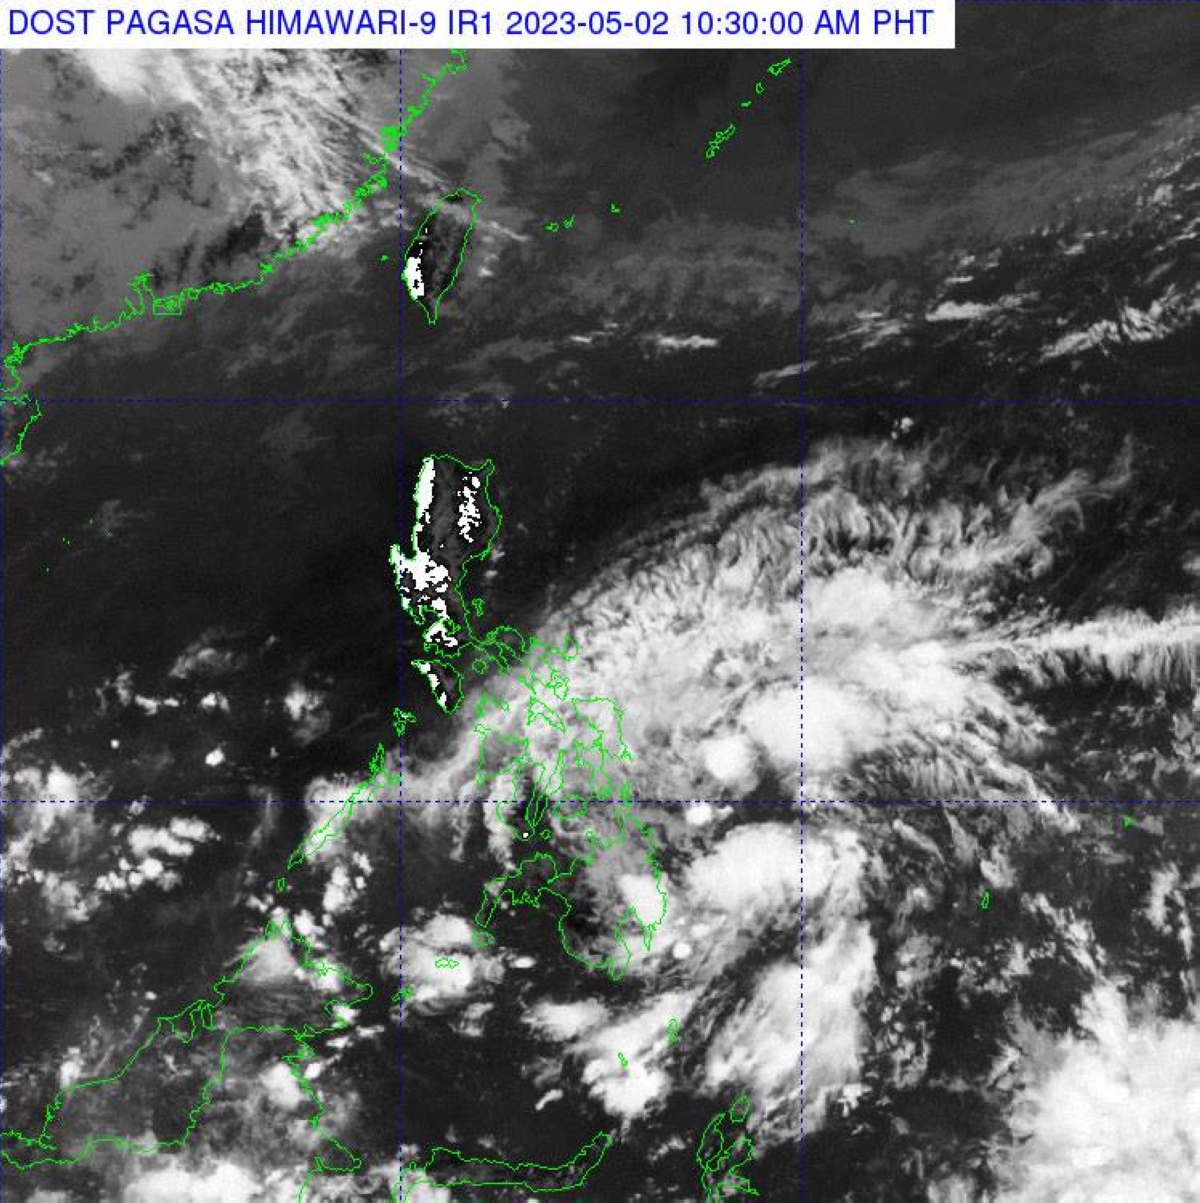 2 storms likely to enter PH in May | The Manila Times